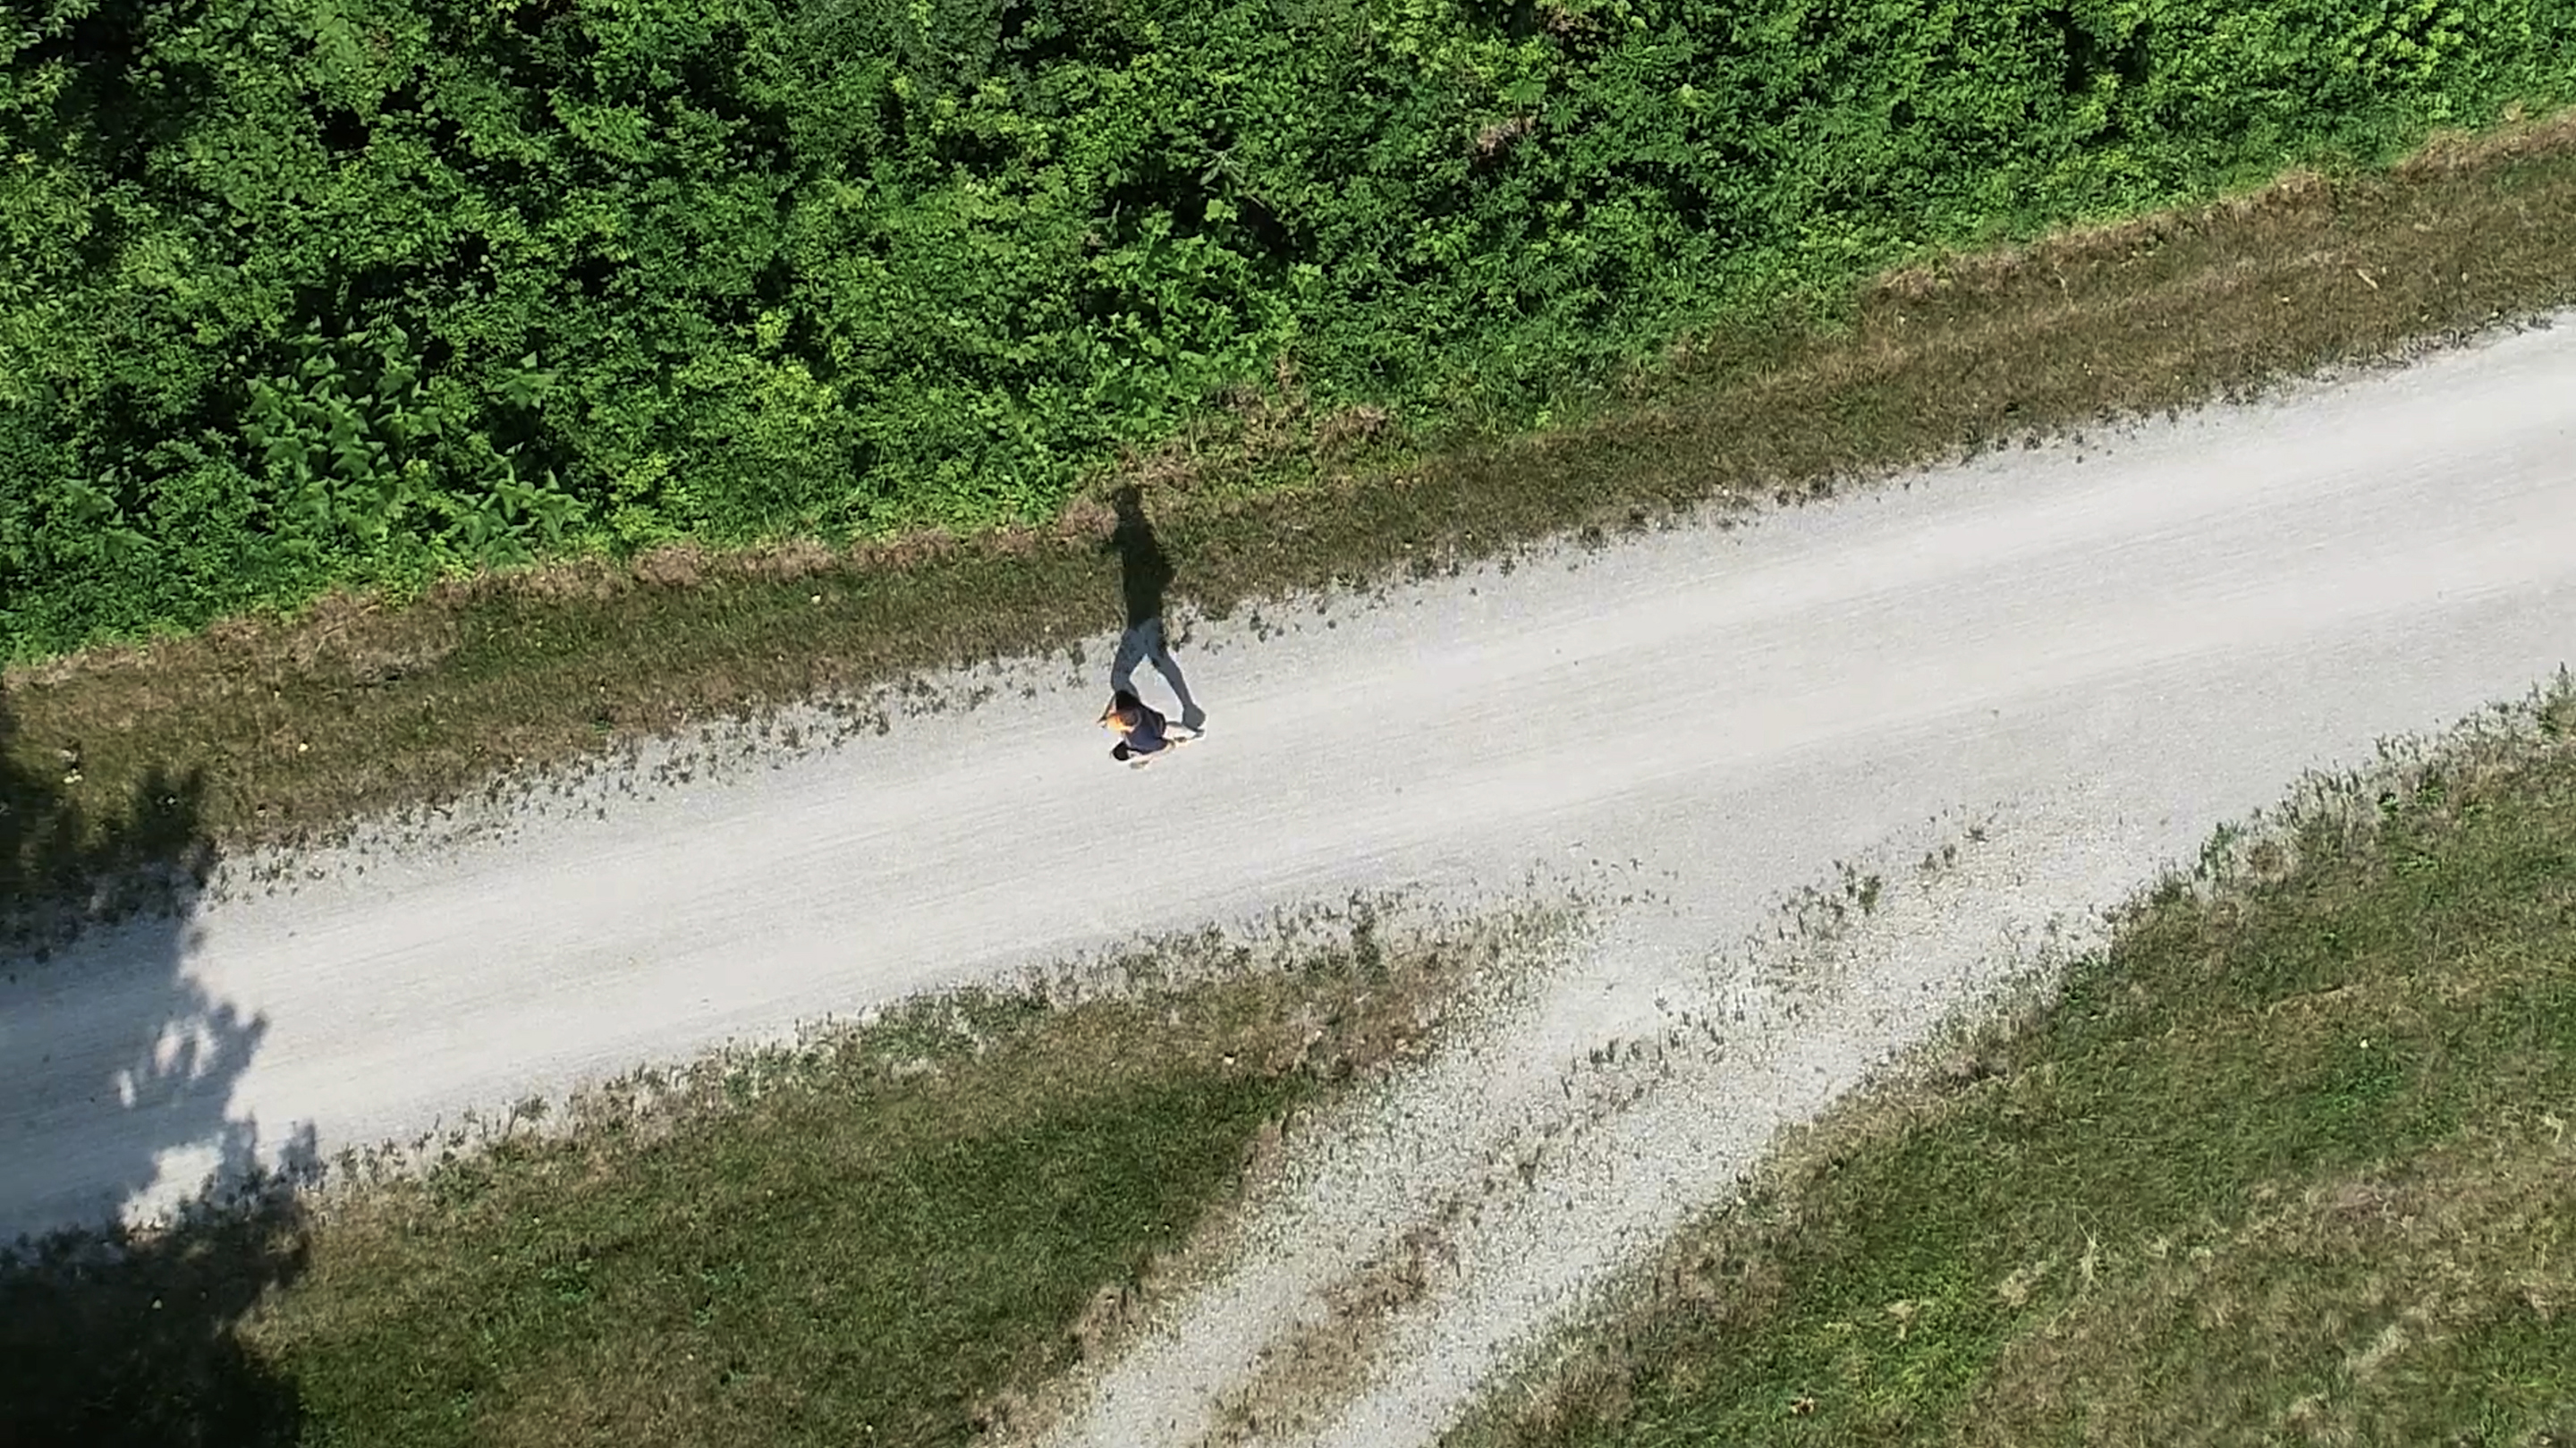 Drone Storytelling: Outrunning mortality